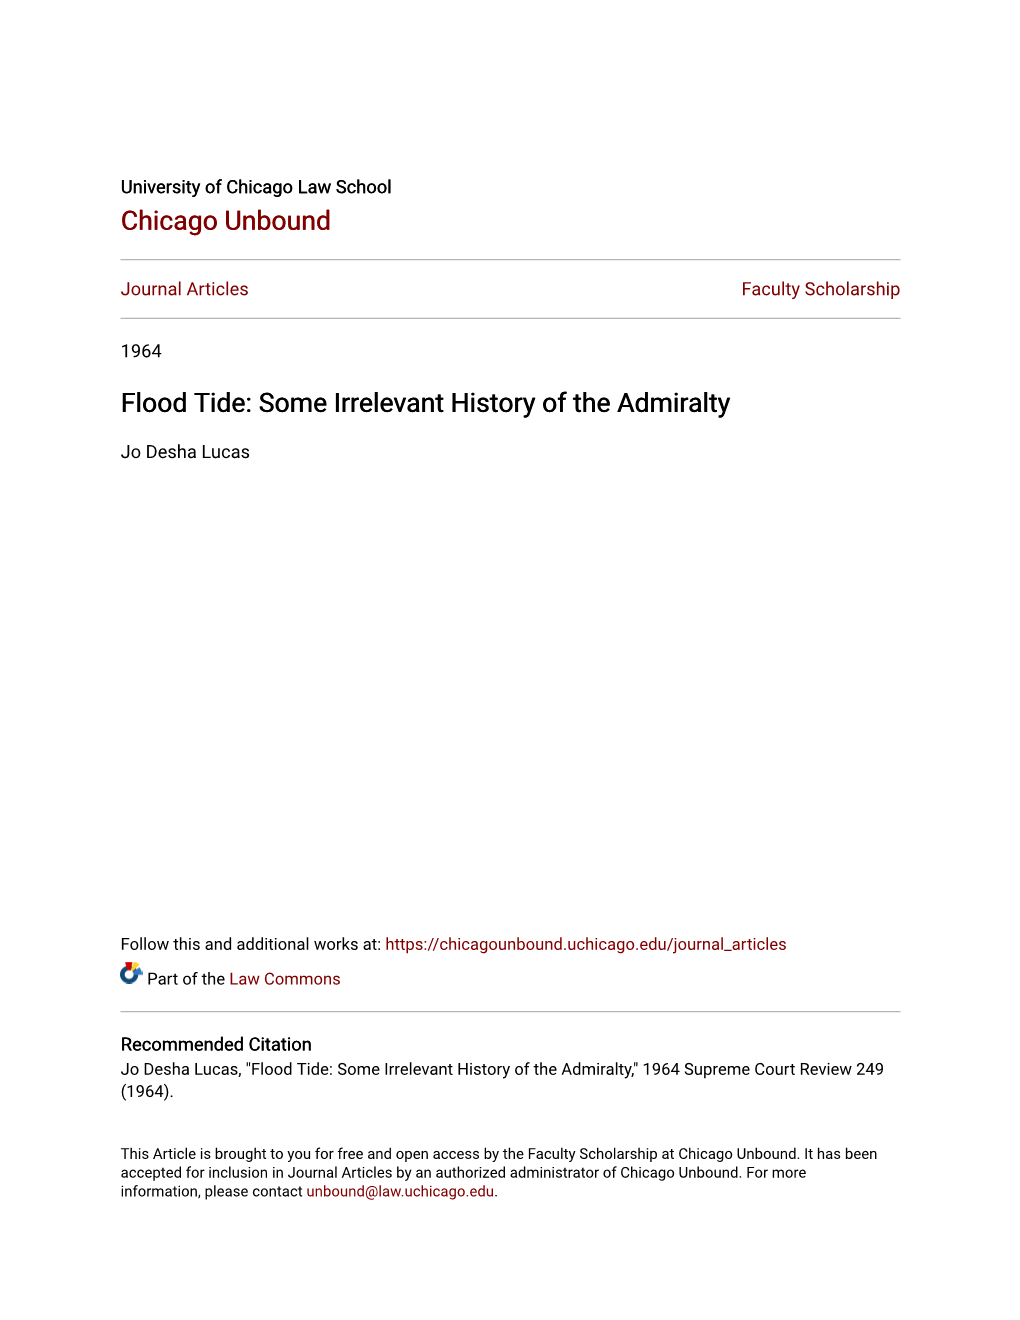 Flood Tide: Some Irrelevant History of the Admiralty